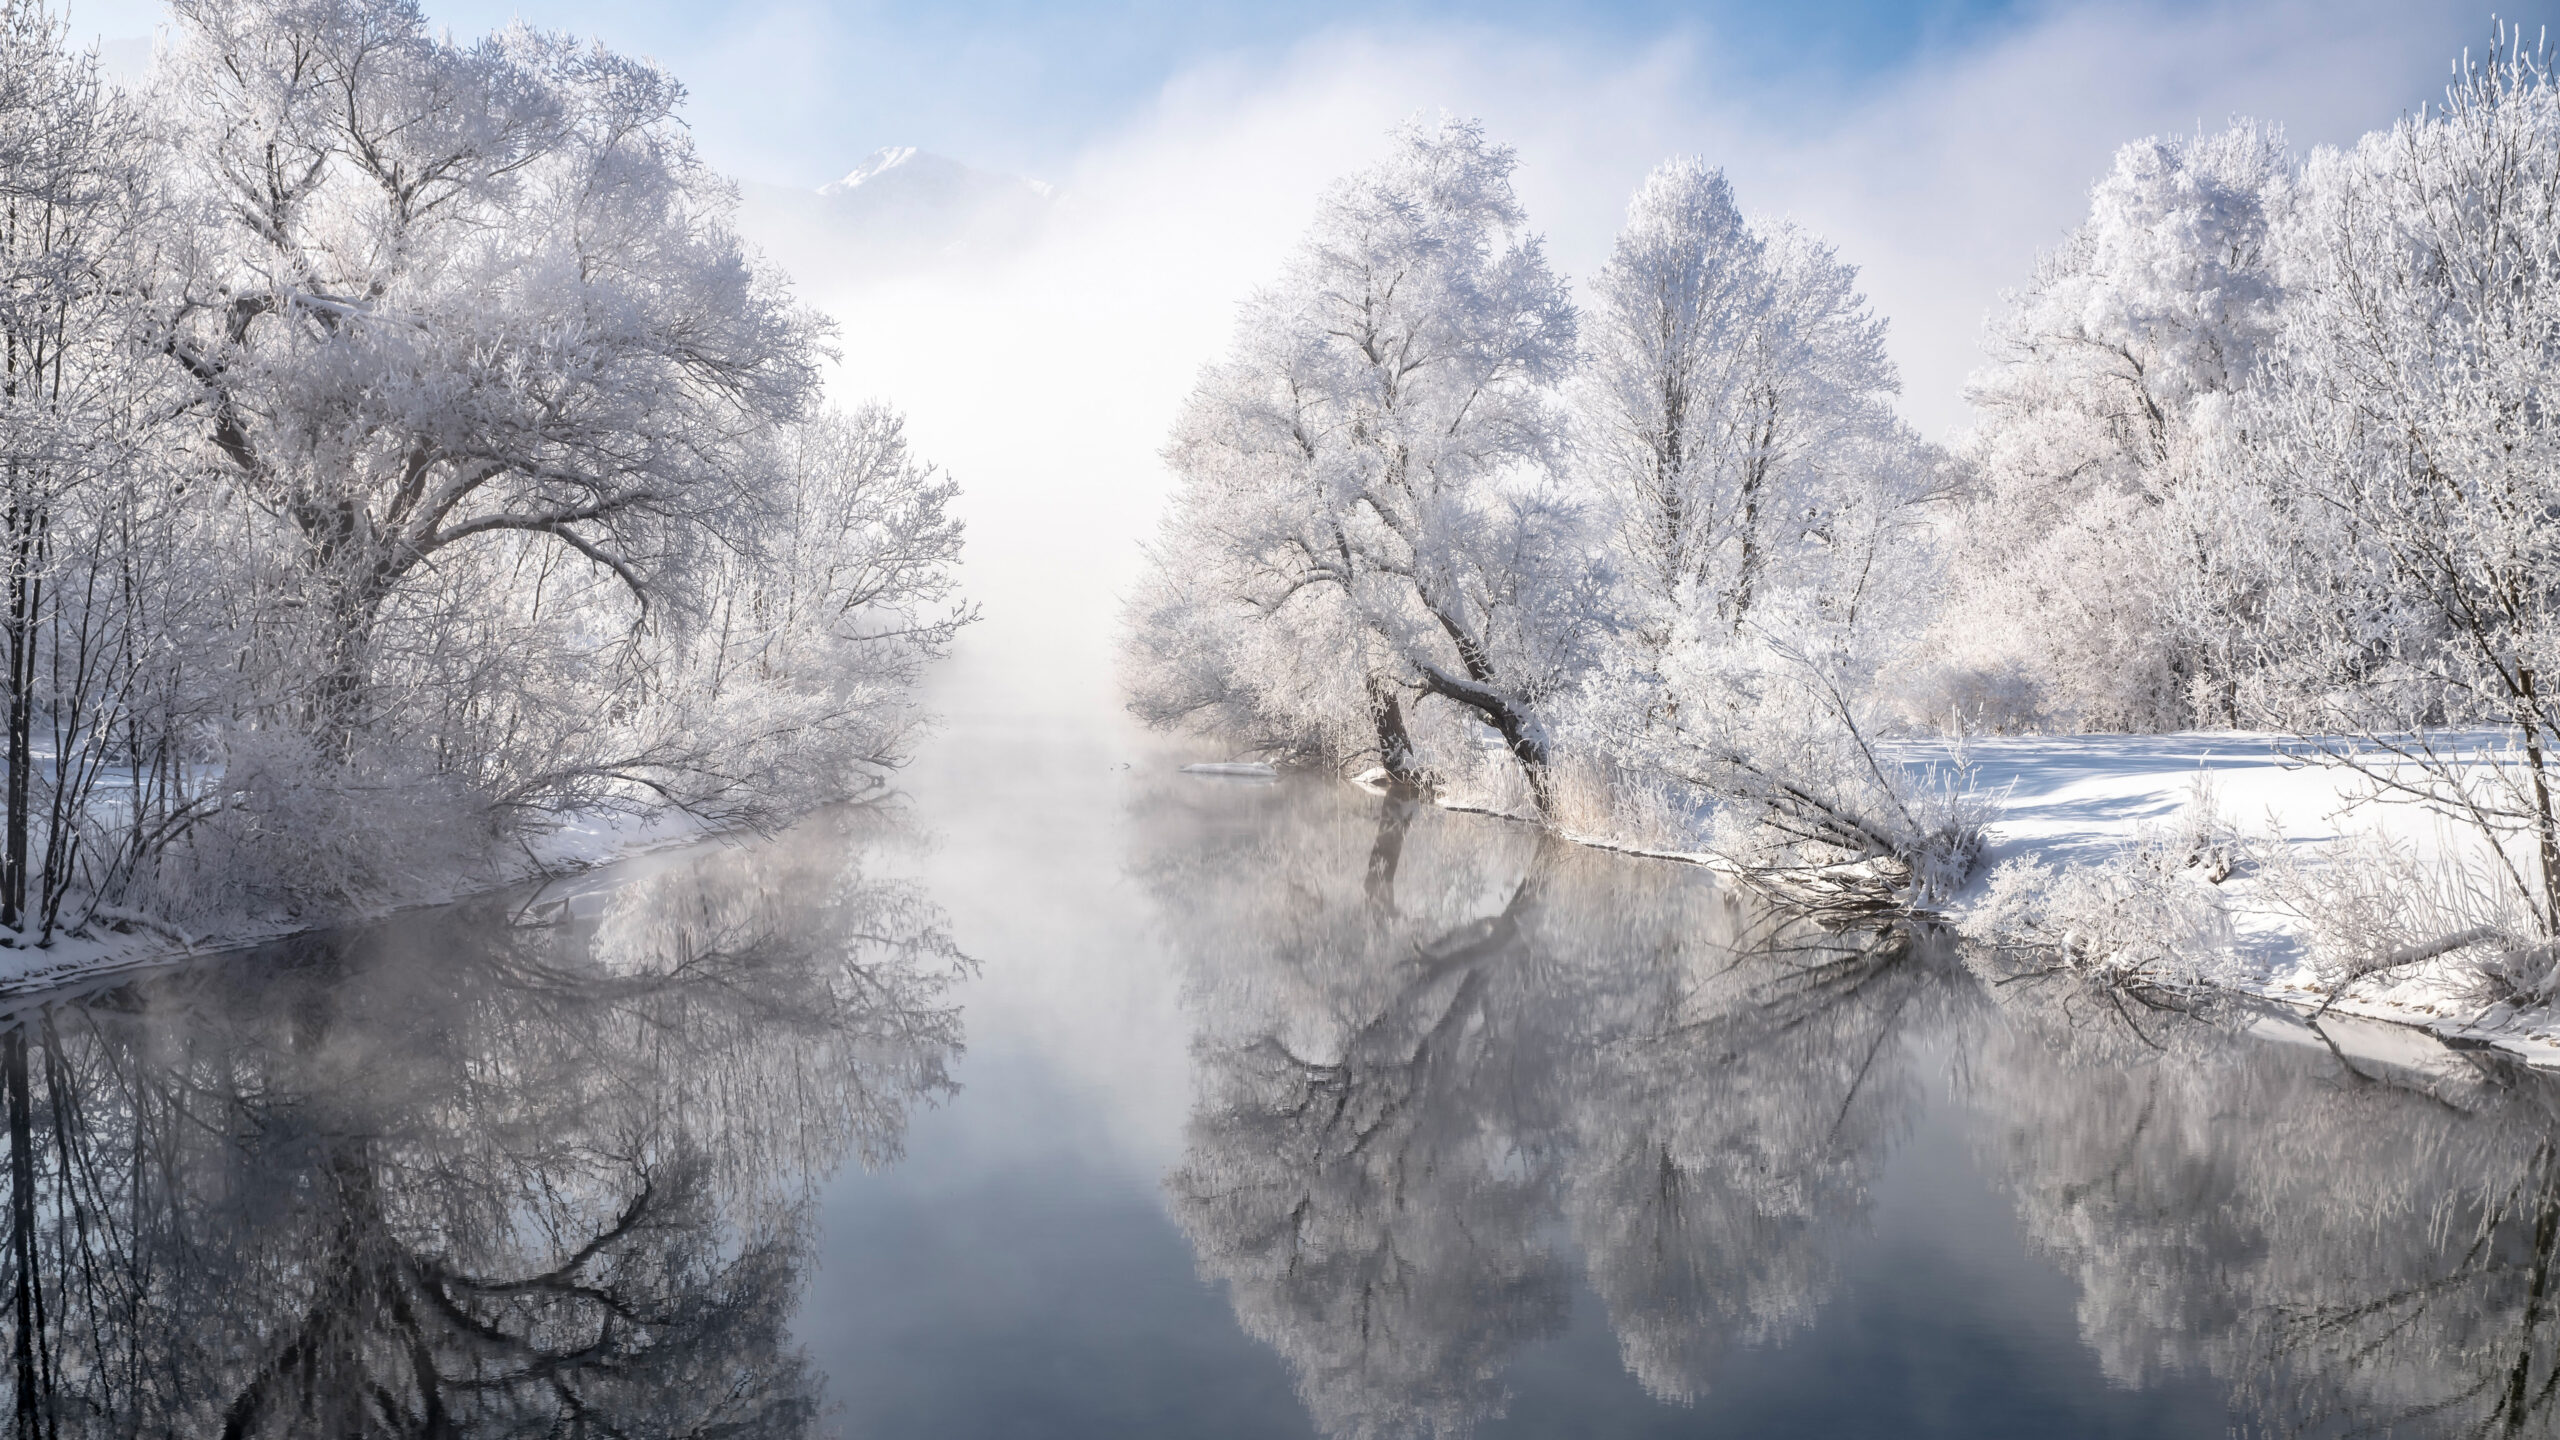 River Between Snow Covered Trees Under White Clouds Blue Sky Reflection On Water K K HD Winter